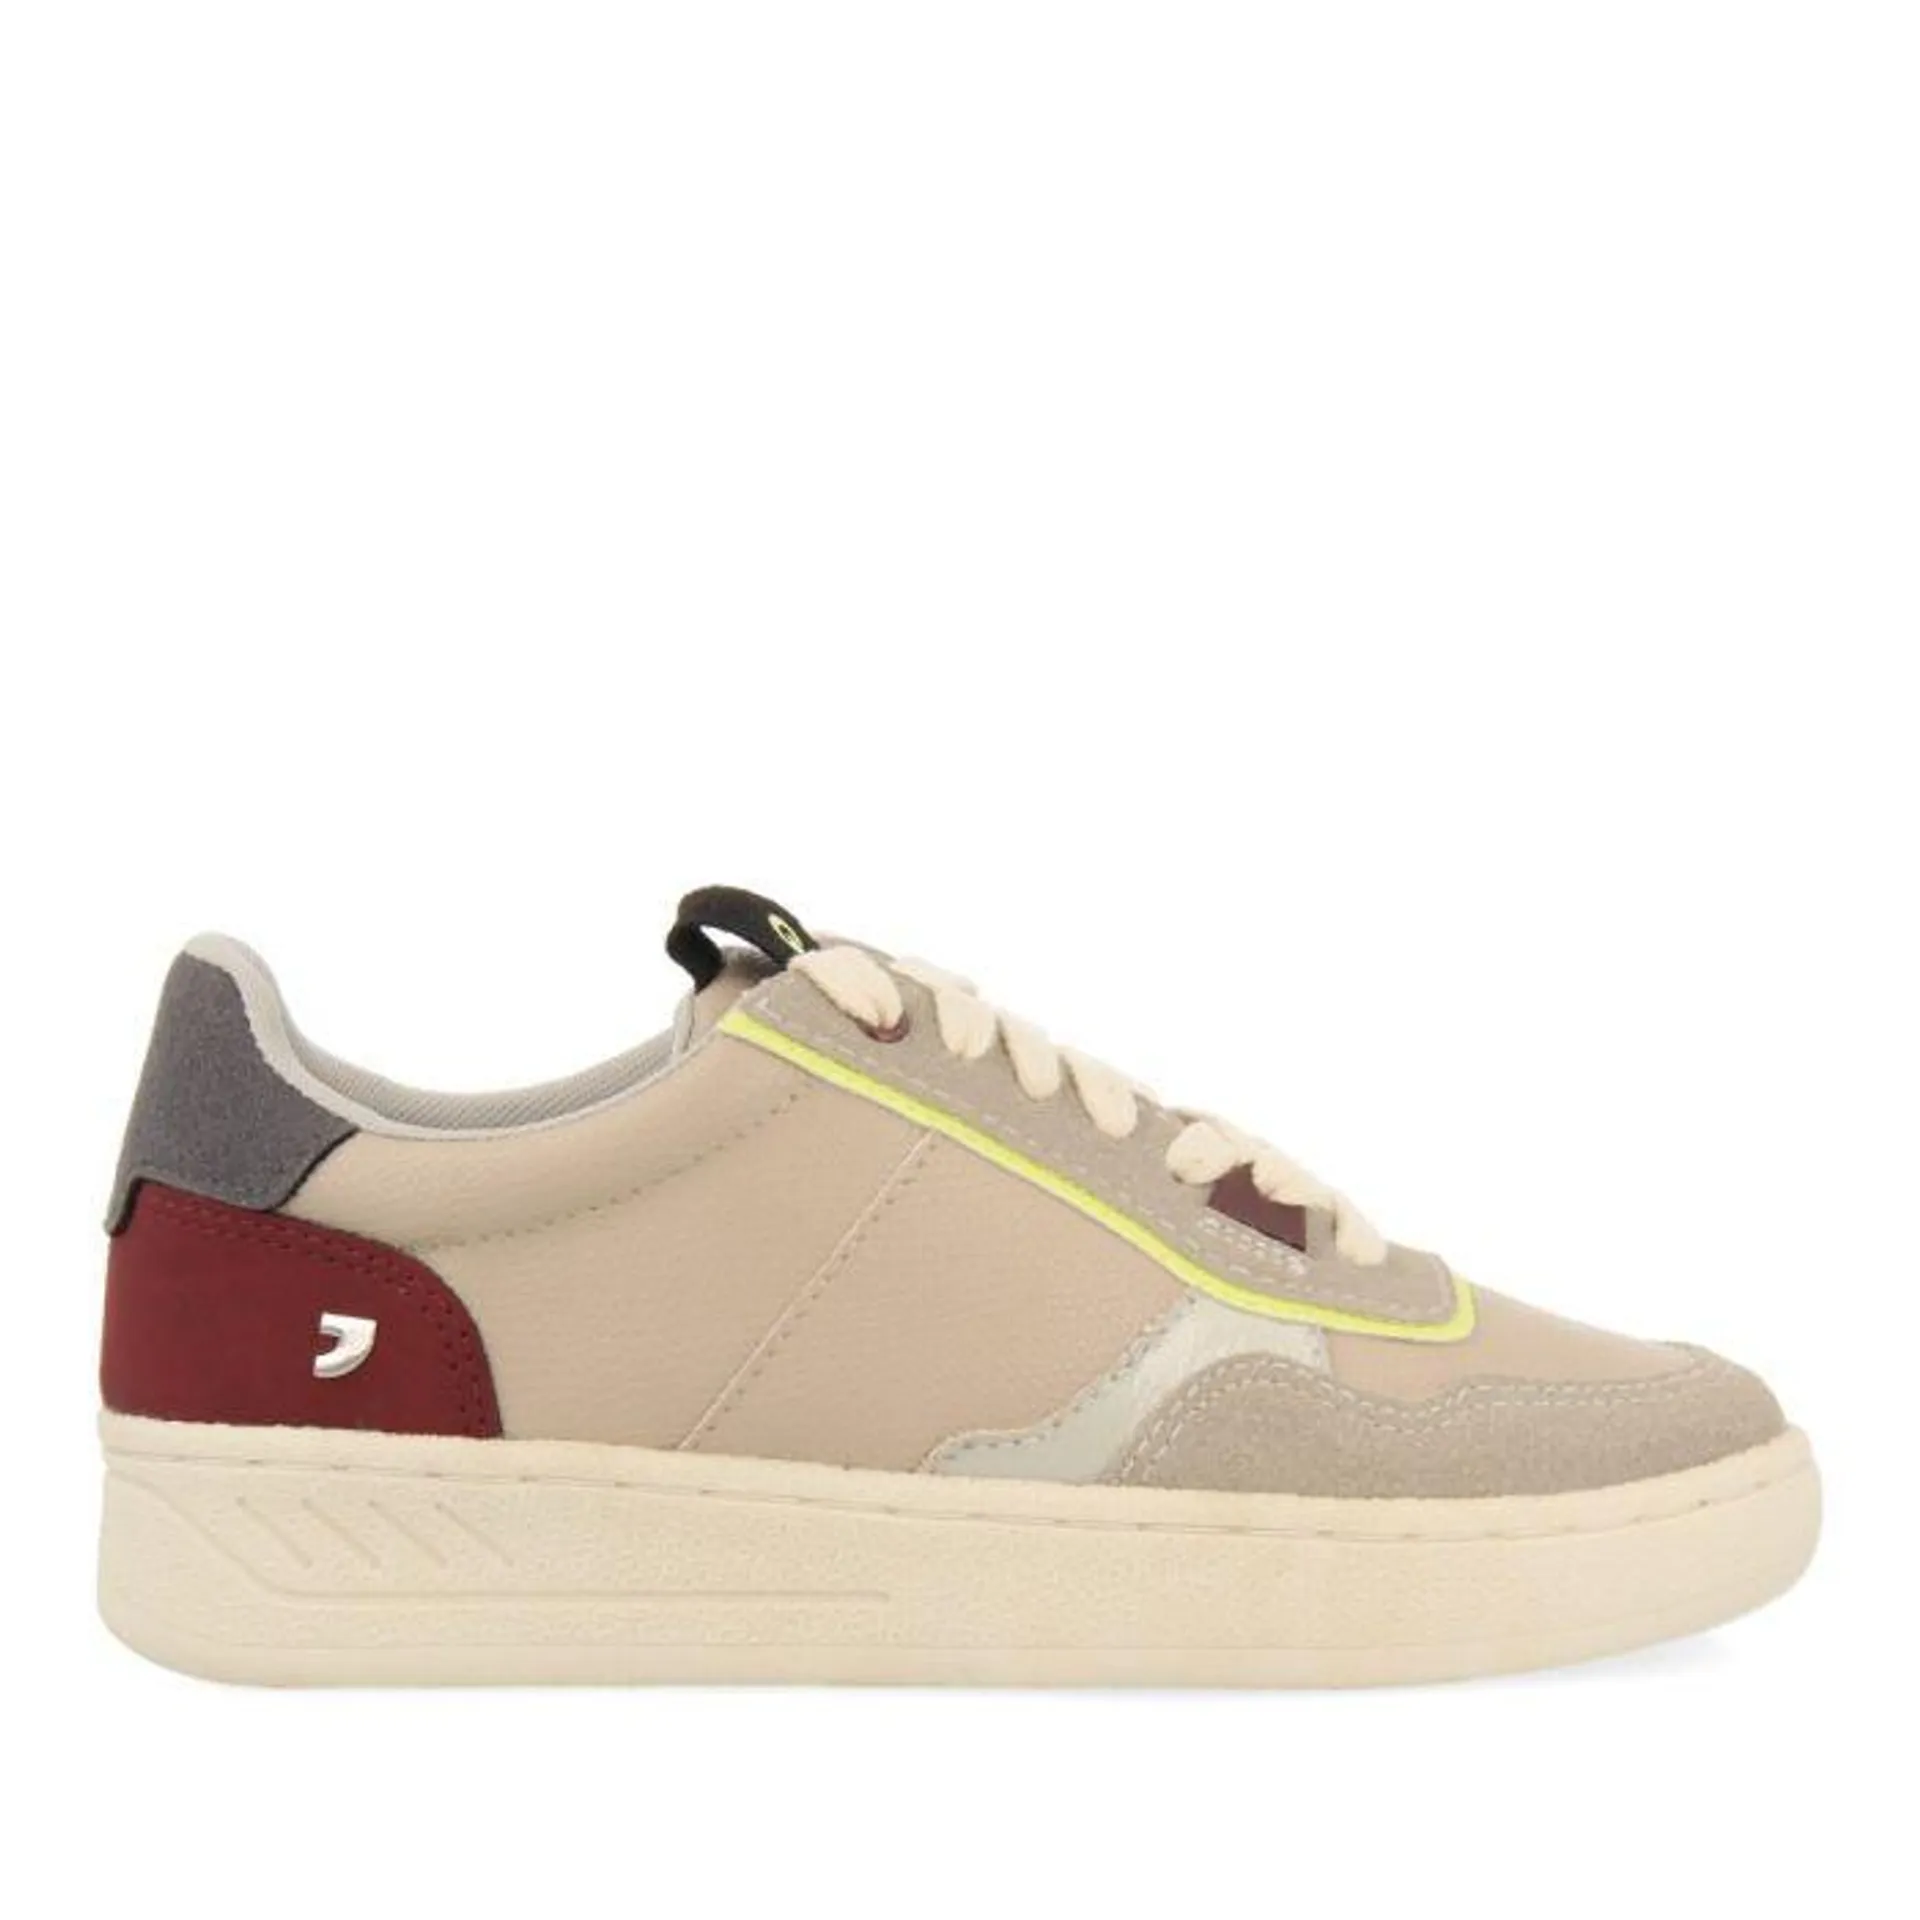 Kappel women's beige sneakers with burgundy, beige and light blue pieces and neon details